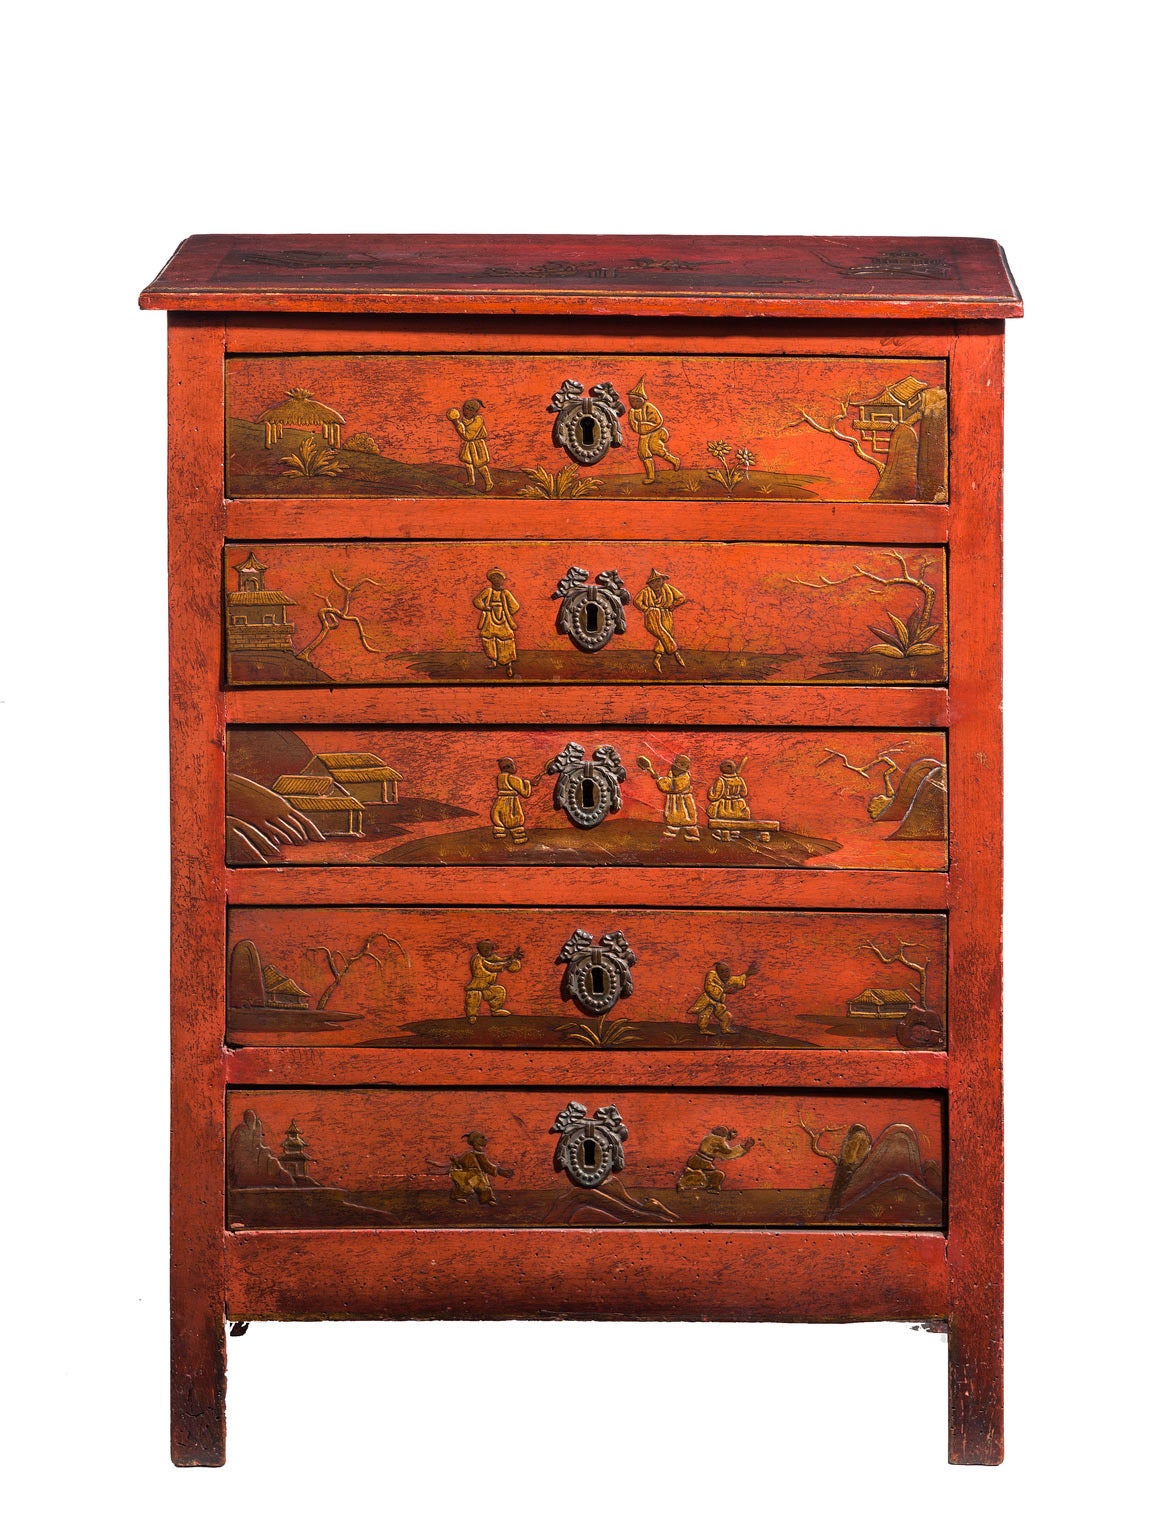 A rare mid-18th century Continental red lacquered chest, of unusually slender proportions. The finely painted and gilded decoration in the oriental taste and more than 90% original. Period escutcheons.